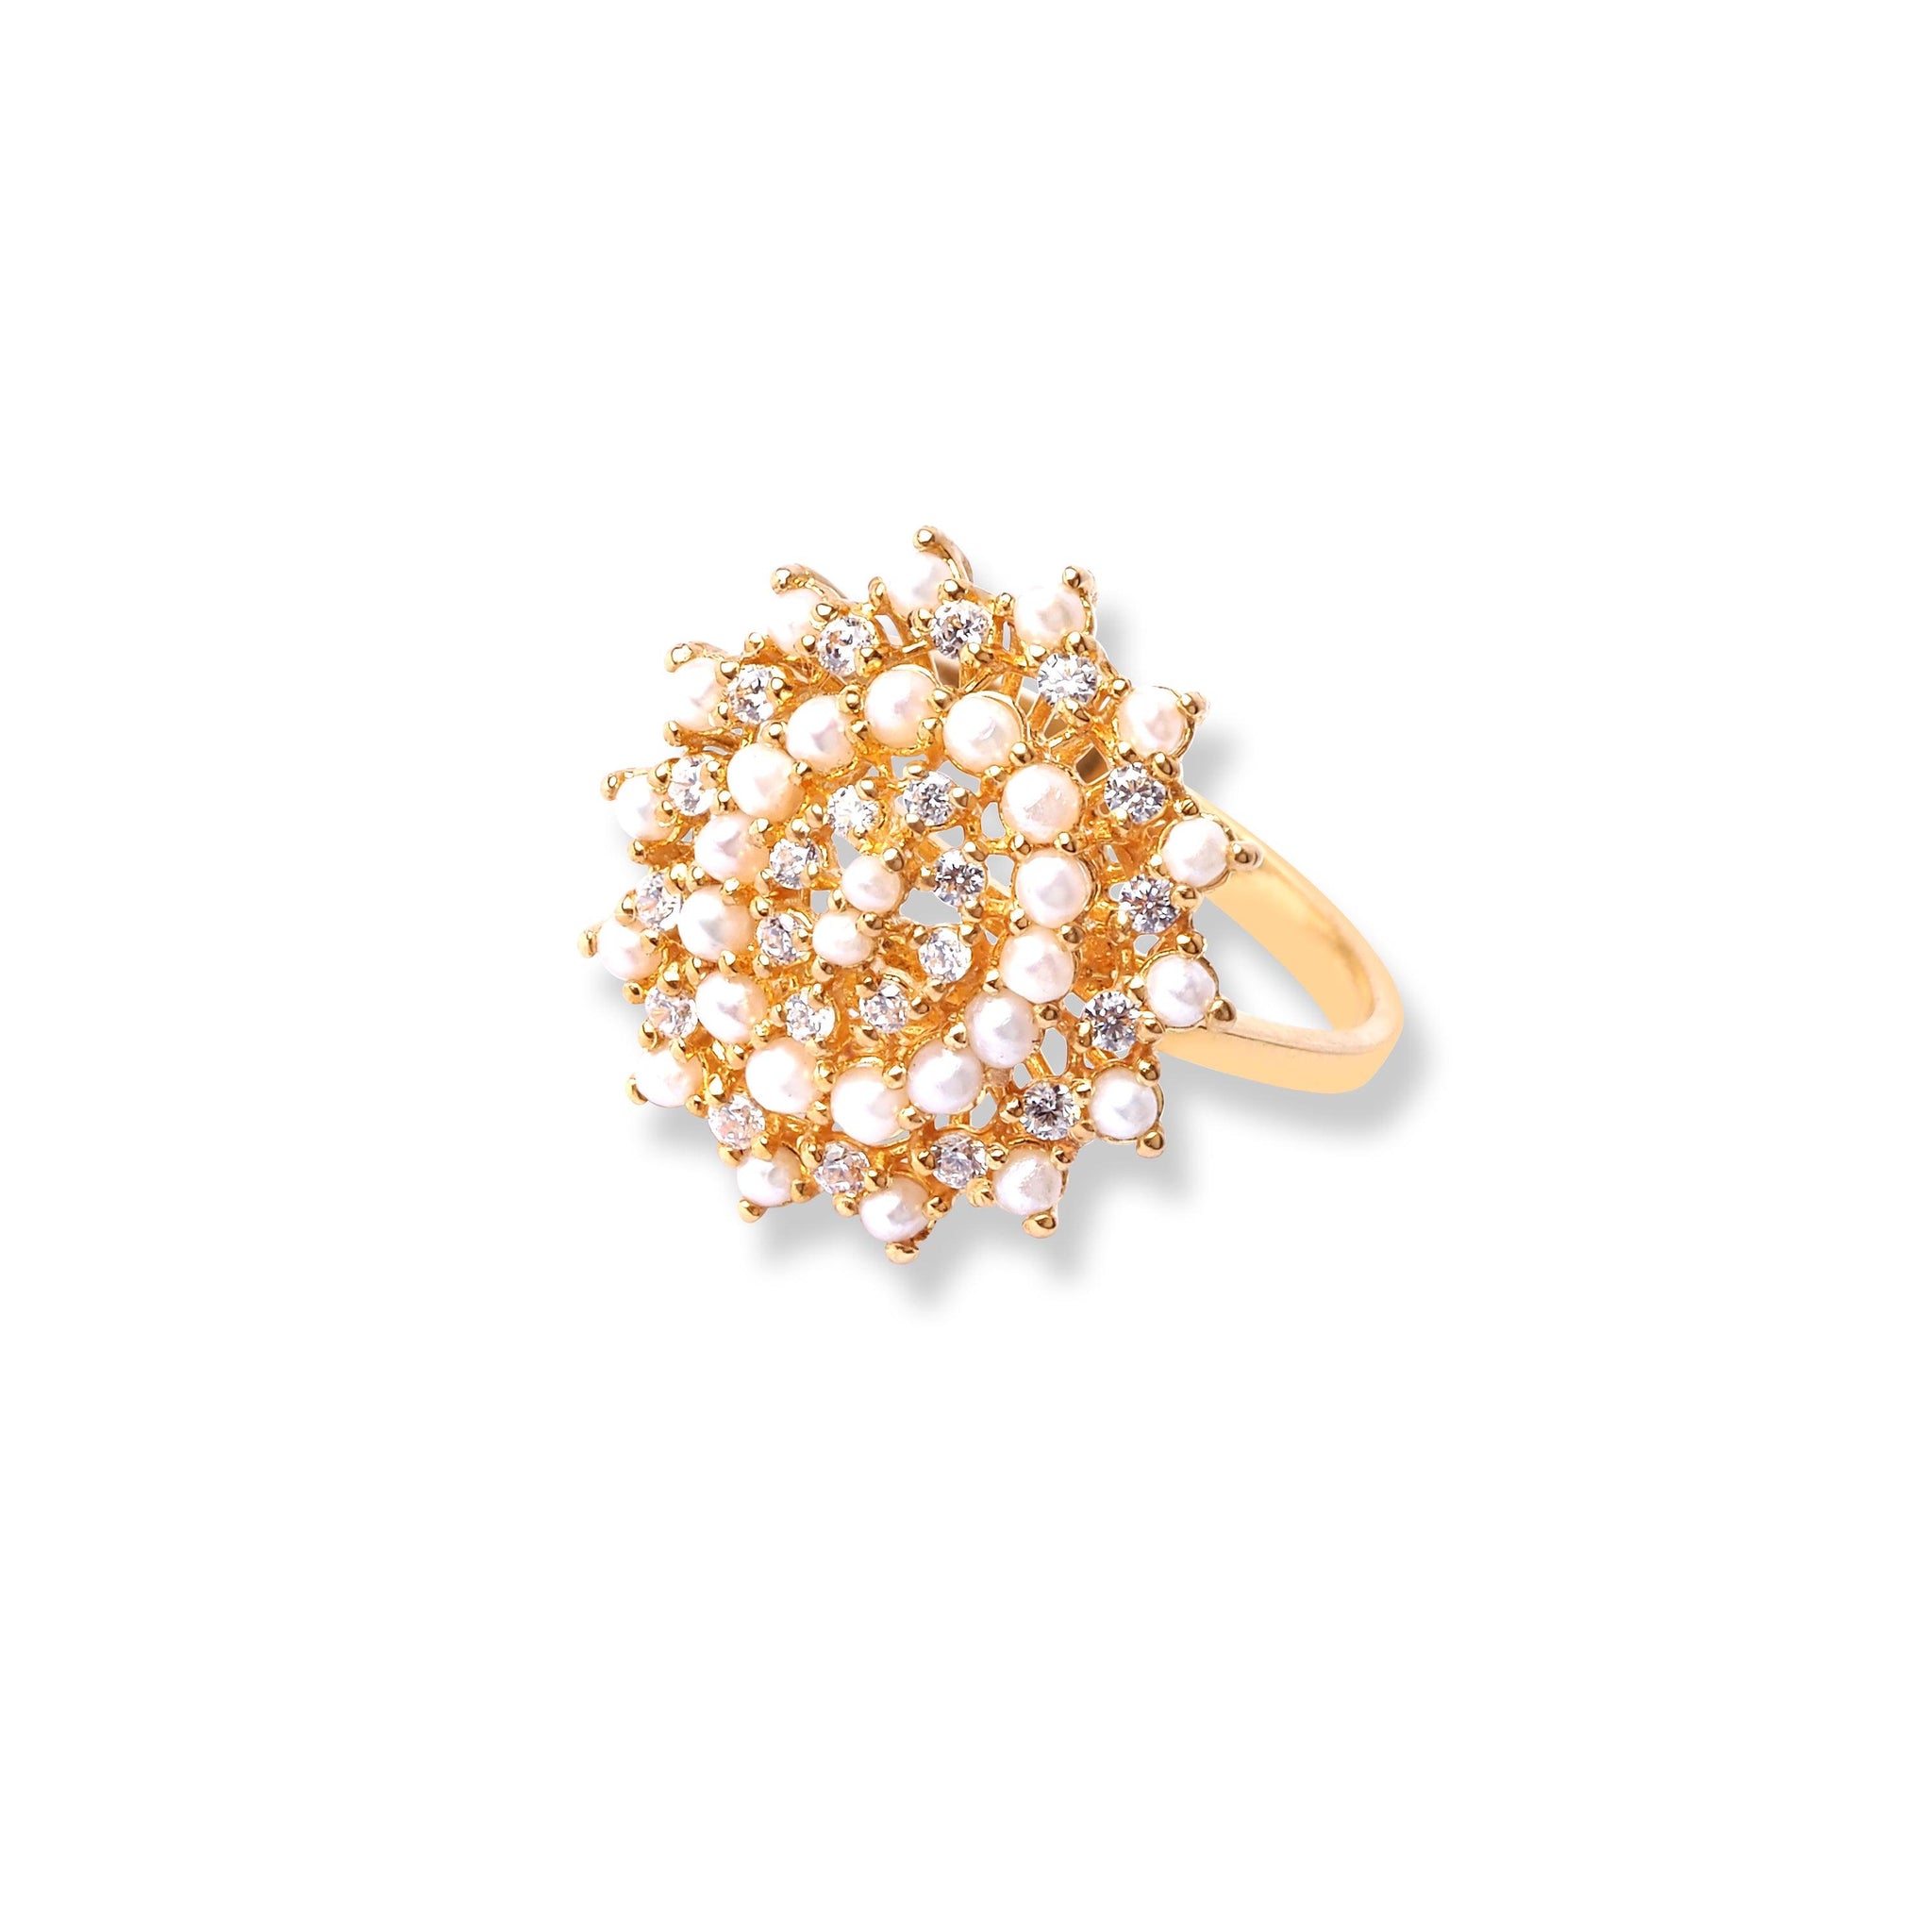 22ct Gold Ring With Cultured Pearl & Cubic Zirconia Stones (4.9g) LR-6593